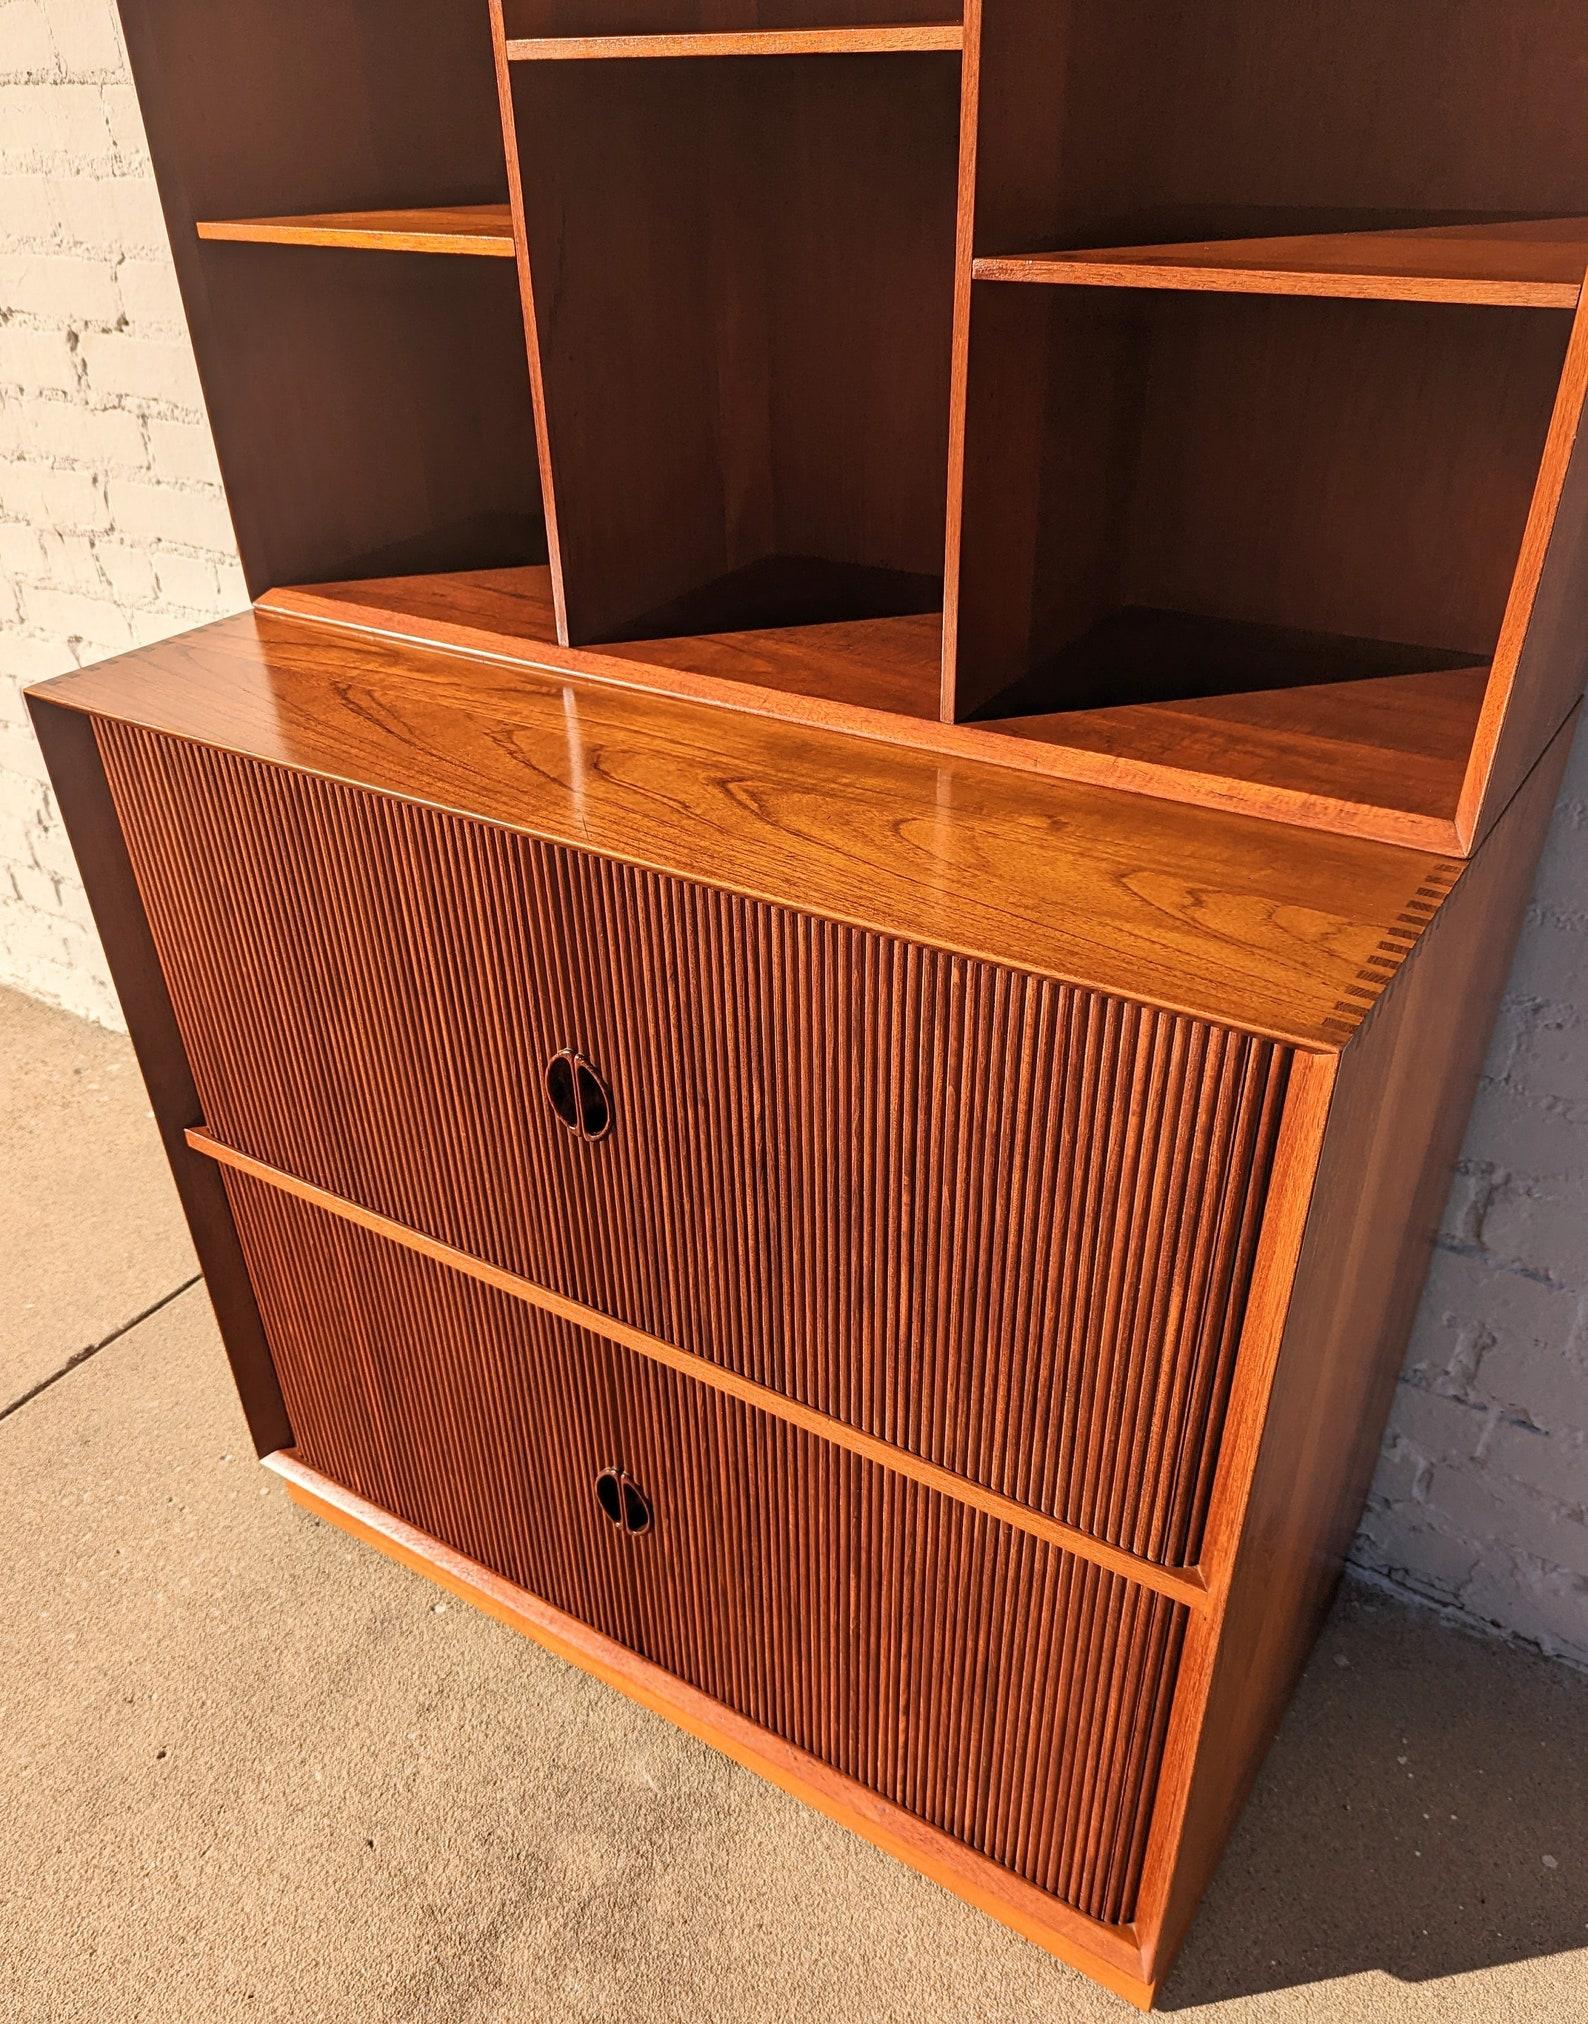 Mid Century Danish Modern Tambour Door Cabinet by Hvidt & Molgaard

Above average vintage condition and structurally sound. Has some expected slight finish wear and scratching. Has a couple small dings on edges and top has a split in wood where the